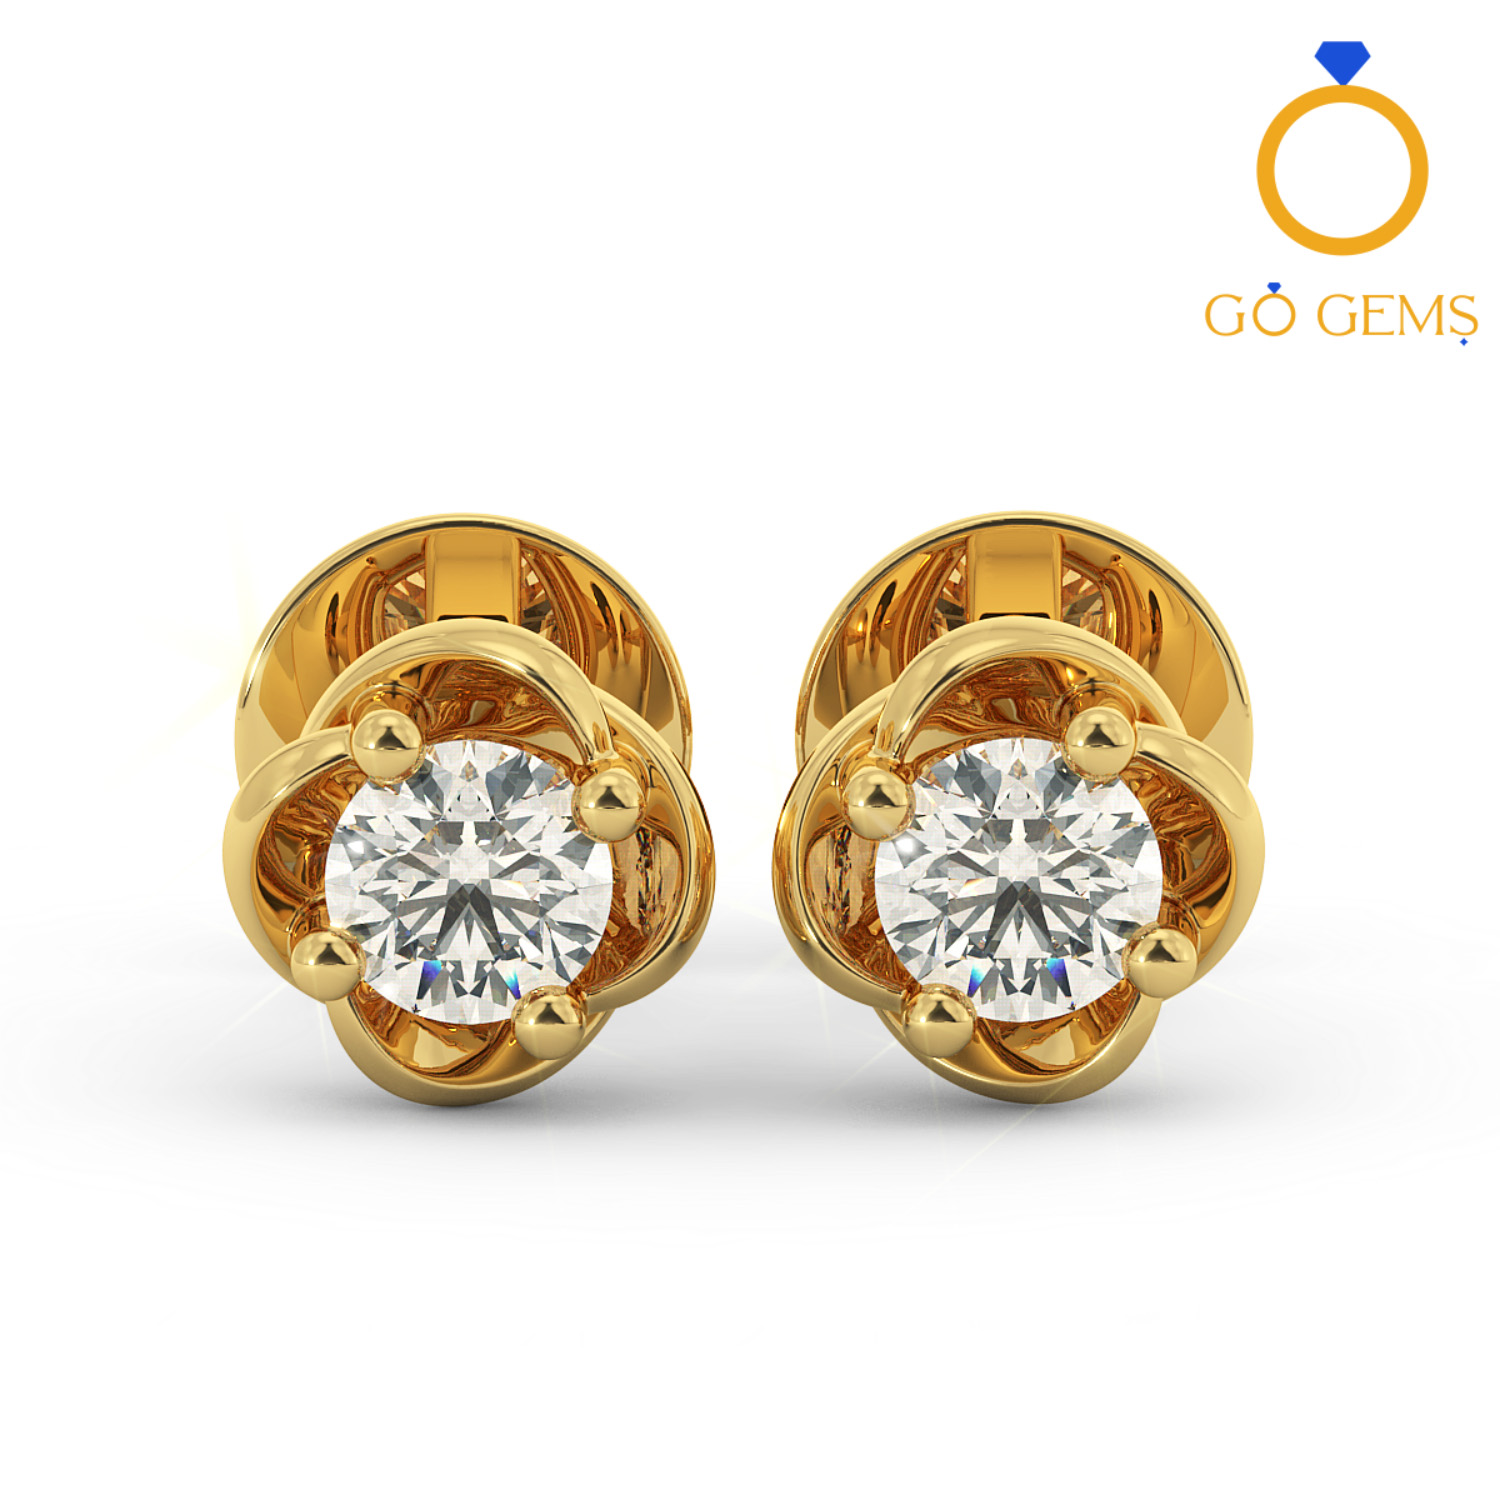 14k Yellow Gold Swarovski Earrings for Women & Men with Genuine Round  Swarovski | Cubic Zirconia Earrings Studs with Gold Earring Backs | 3  Carats total | by MAX + STONE - Walmart.com